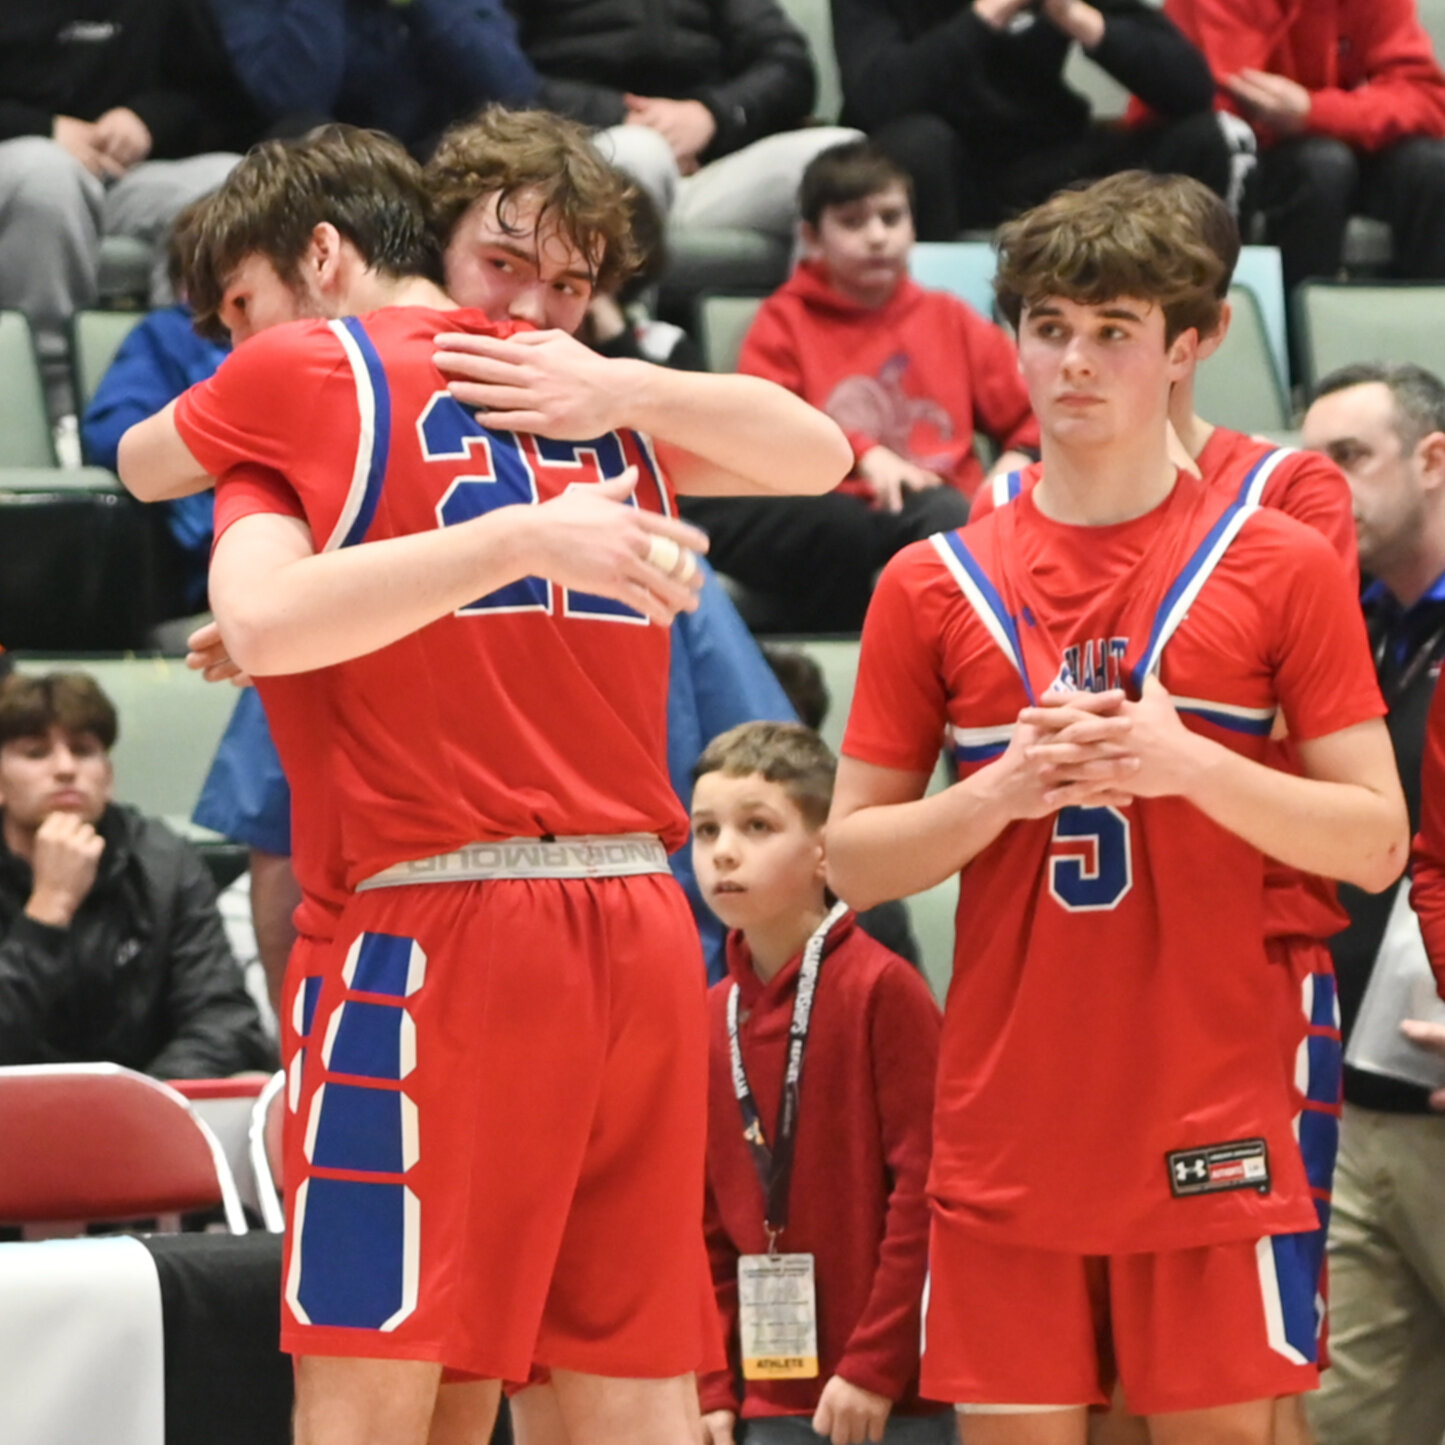 Senior Zach Philipkoski hugs classmate Colton Suriano following New Hartford's 58-48 setback to  Tappan Zee in the state Class A semifinal on Friday at Cool Insuring Arena in Glens Falls.